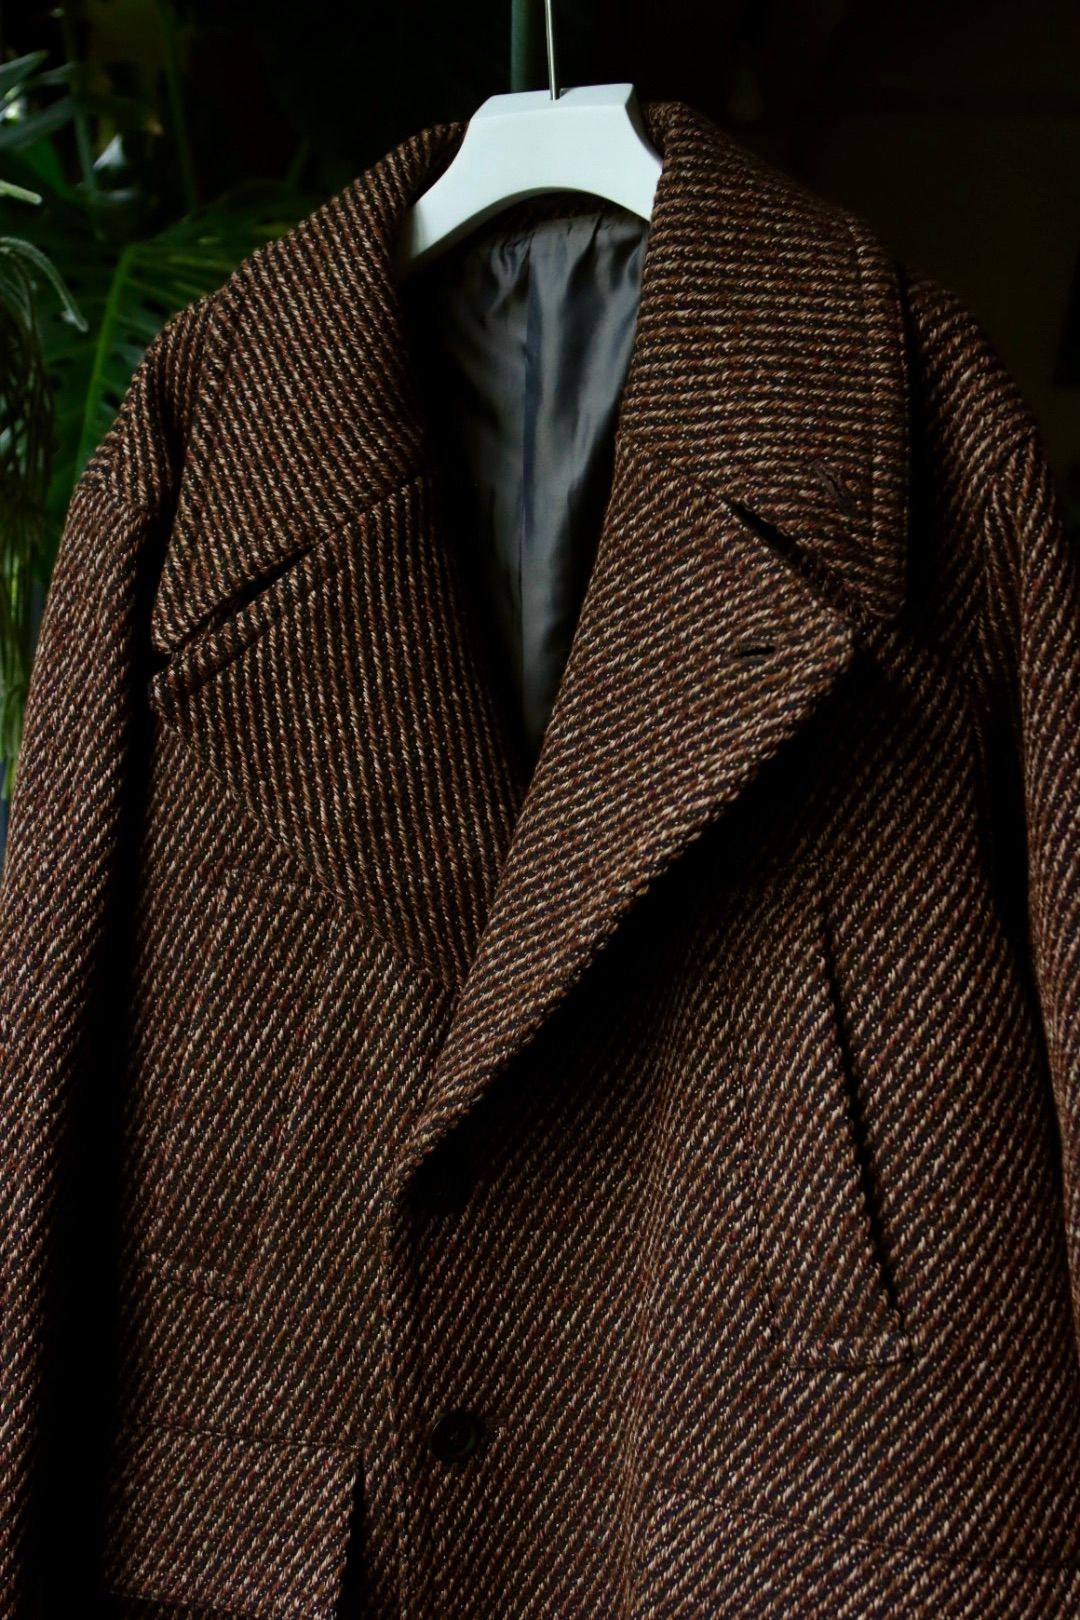 YOKE - ヨーク23AW DOUBLE BREASTED HALF COAT(YK23FW0515C)BROWN☆8月